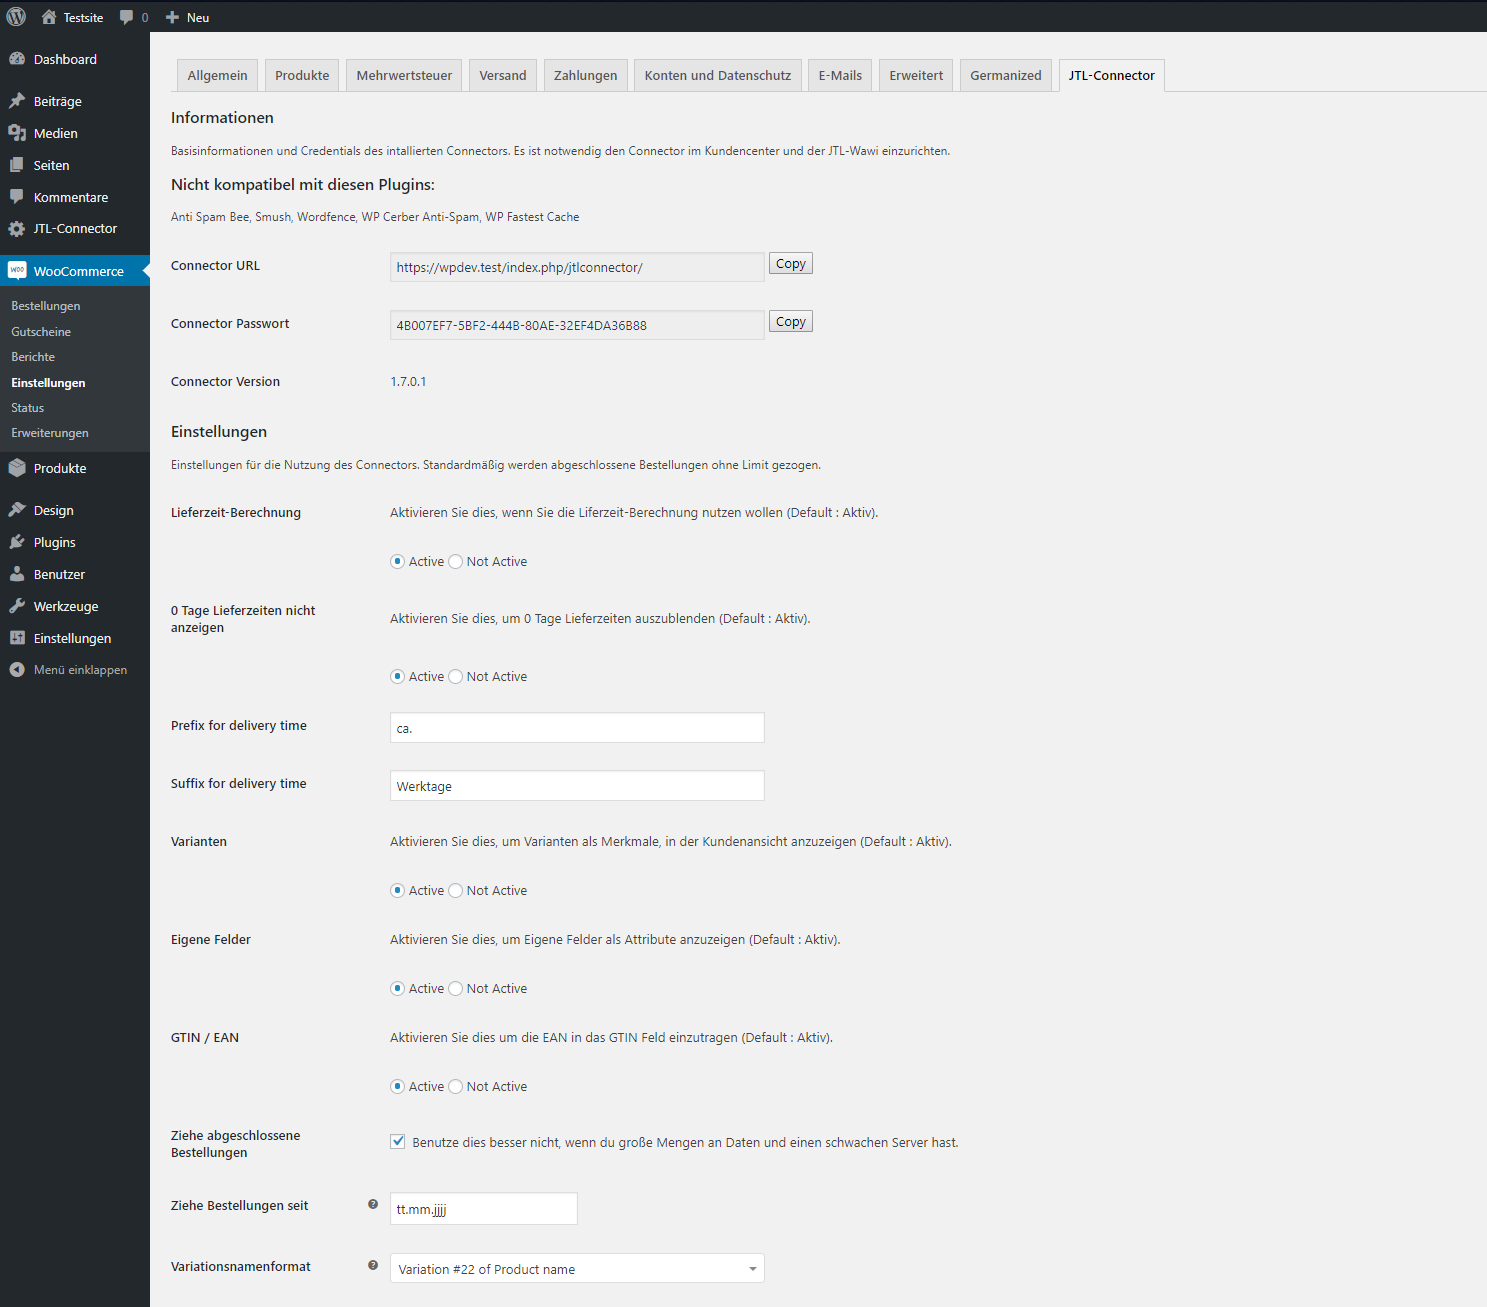 The WooCommerce JTL-Connector (<=1.6.4) settings panel.